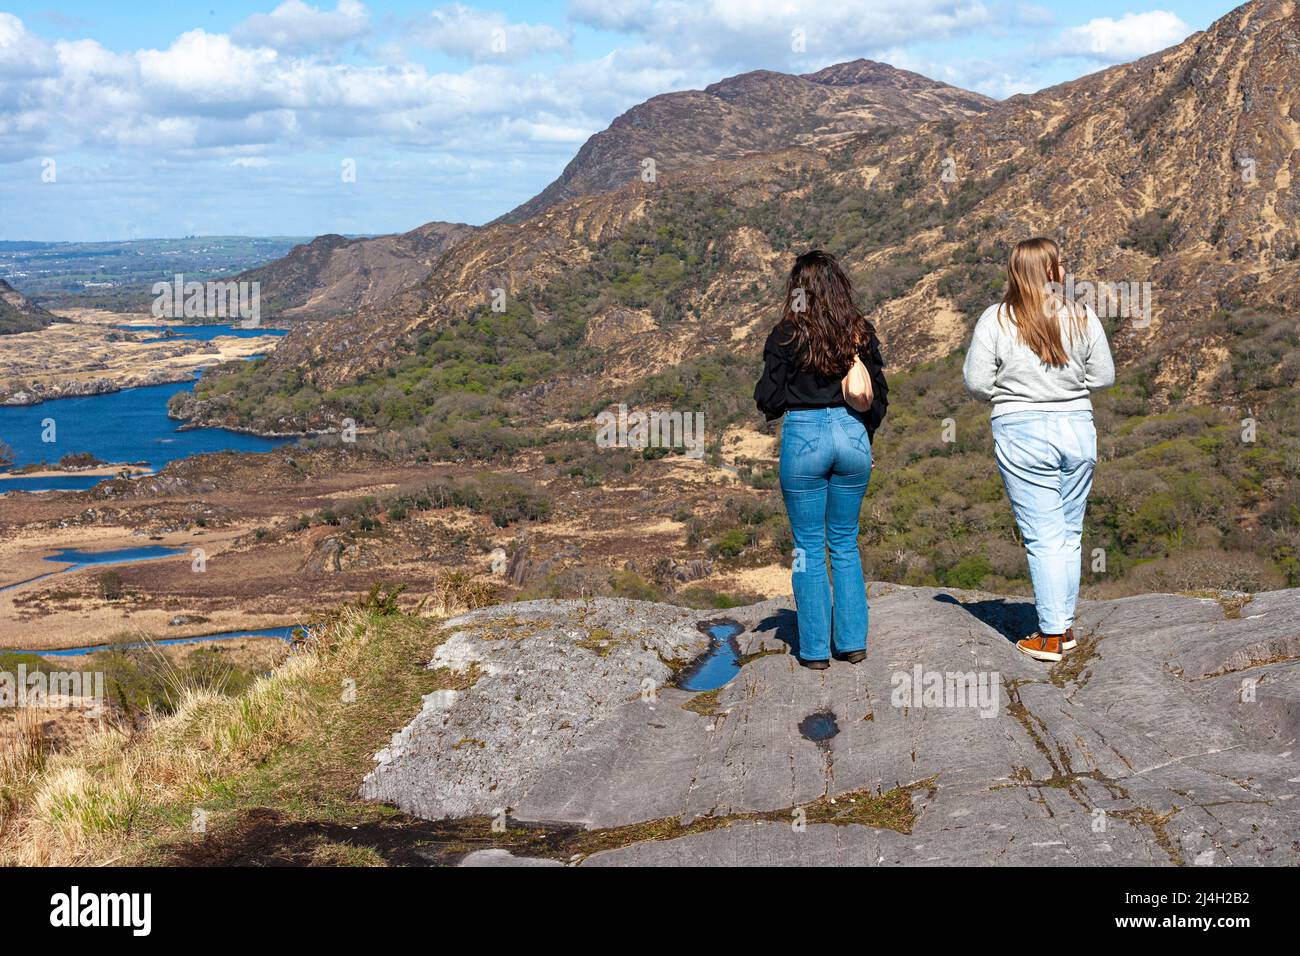 Good Friday, 15th April 2022. Killarney, Co. Kerry. Two American visitors, enjoying the scenery, warm weather and bright sunshine at Ladies View in the Killarney National Park, County Kerry, Ireland. Image Credit: Stephen Power / Alamy Live News. Stock Photo